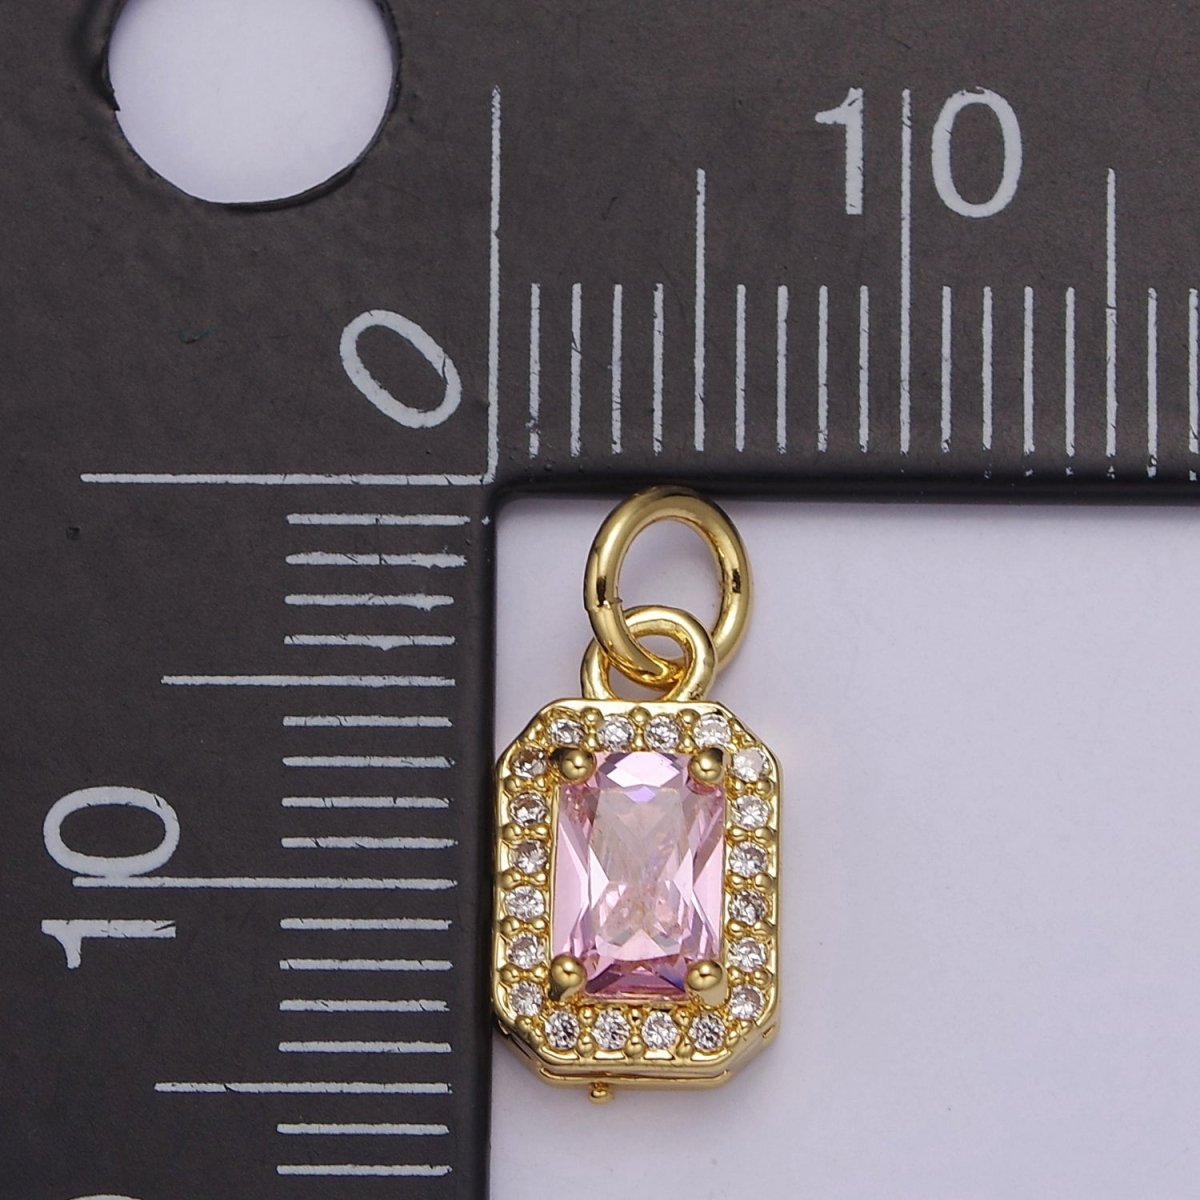 24k Gold Filled Rectangle Birthstone Charm ,Mini Colorful CZ Pendant for Personalized Jewelry Making E715 - E719 - DLUXCA